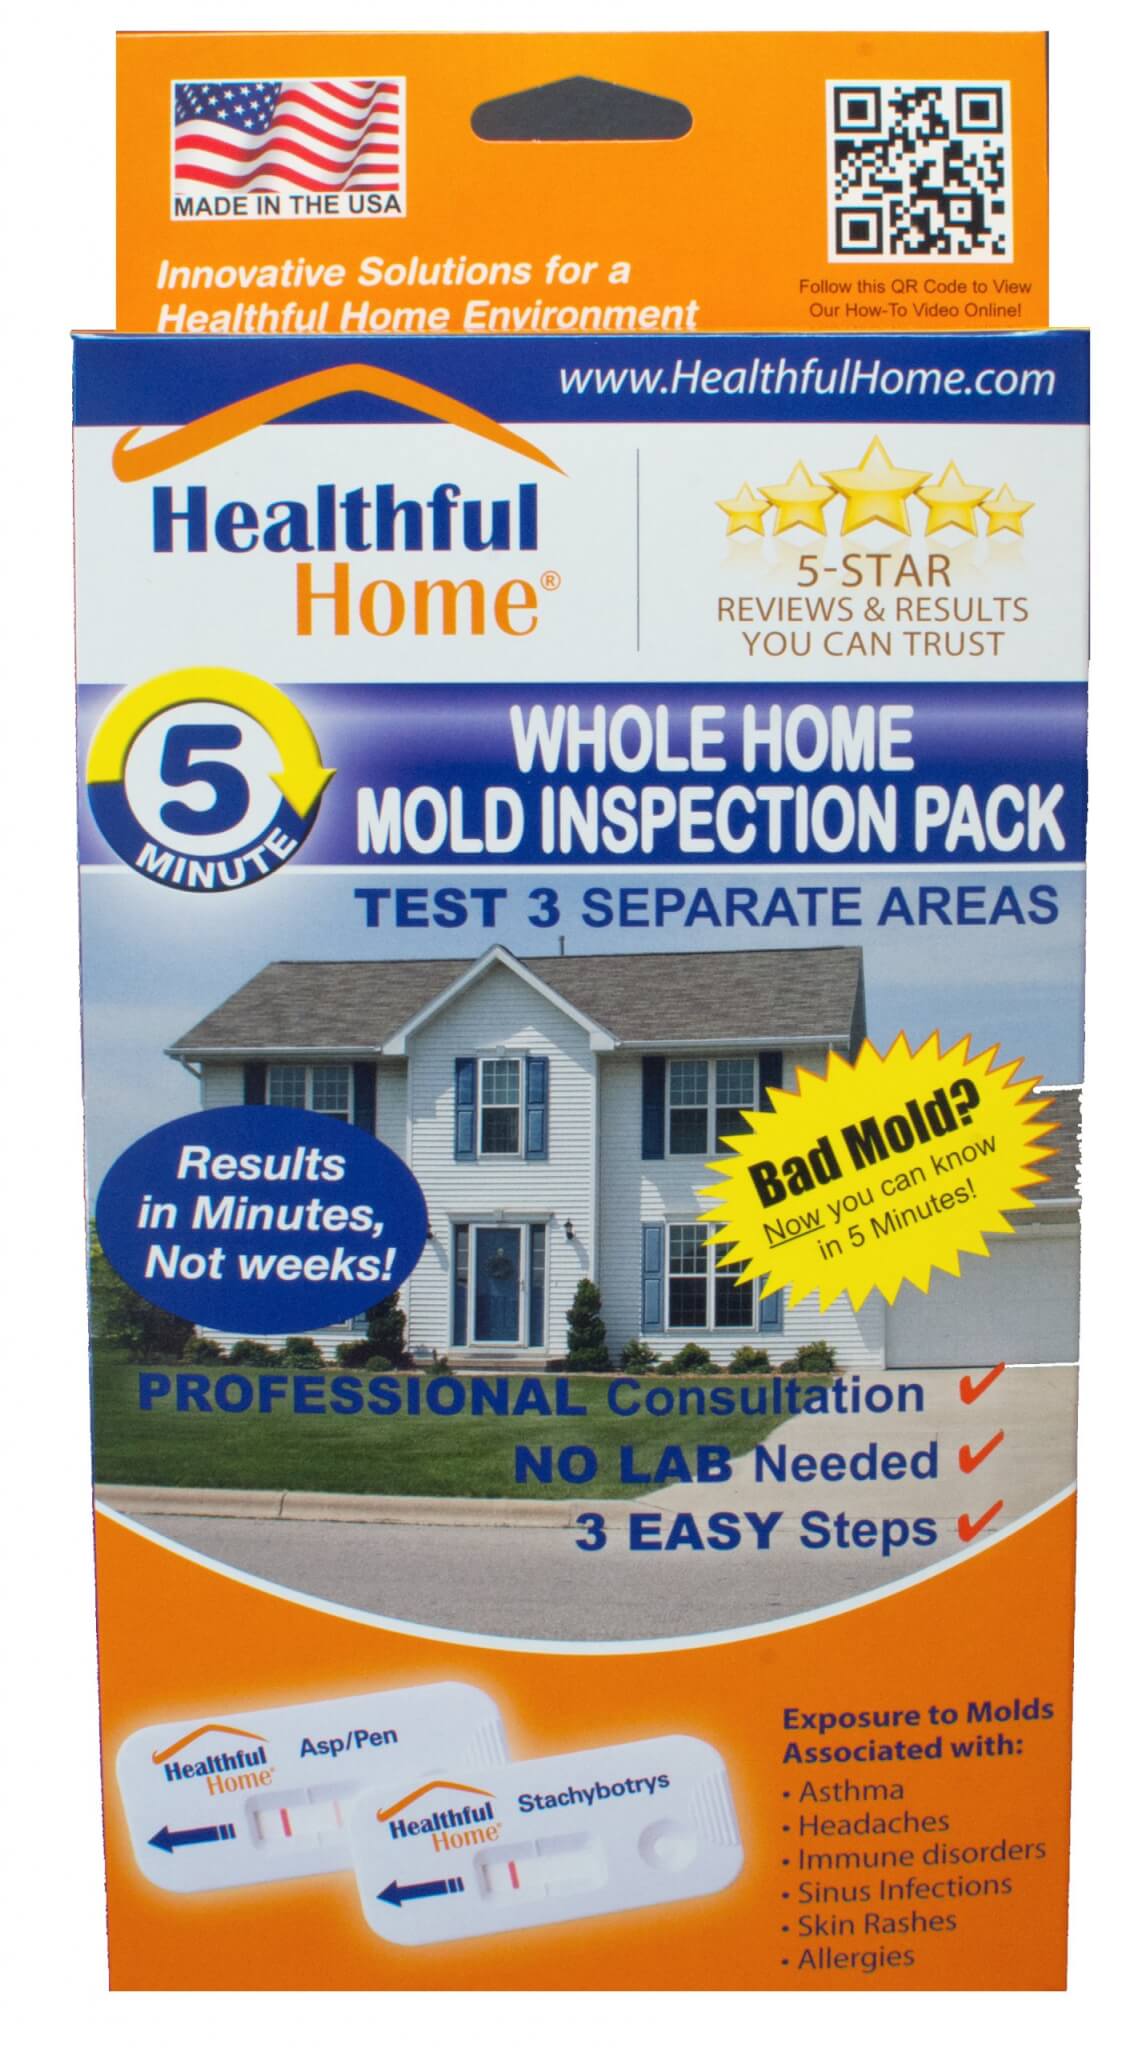 Whole Home 5-Minute Mold Inspection Pack - Healthful Home Products